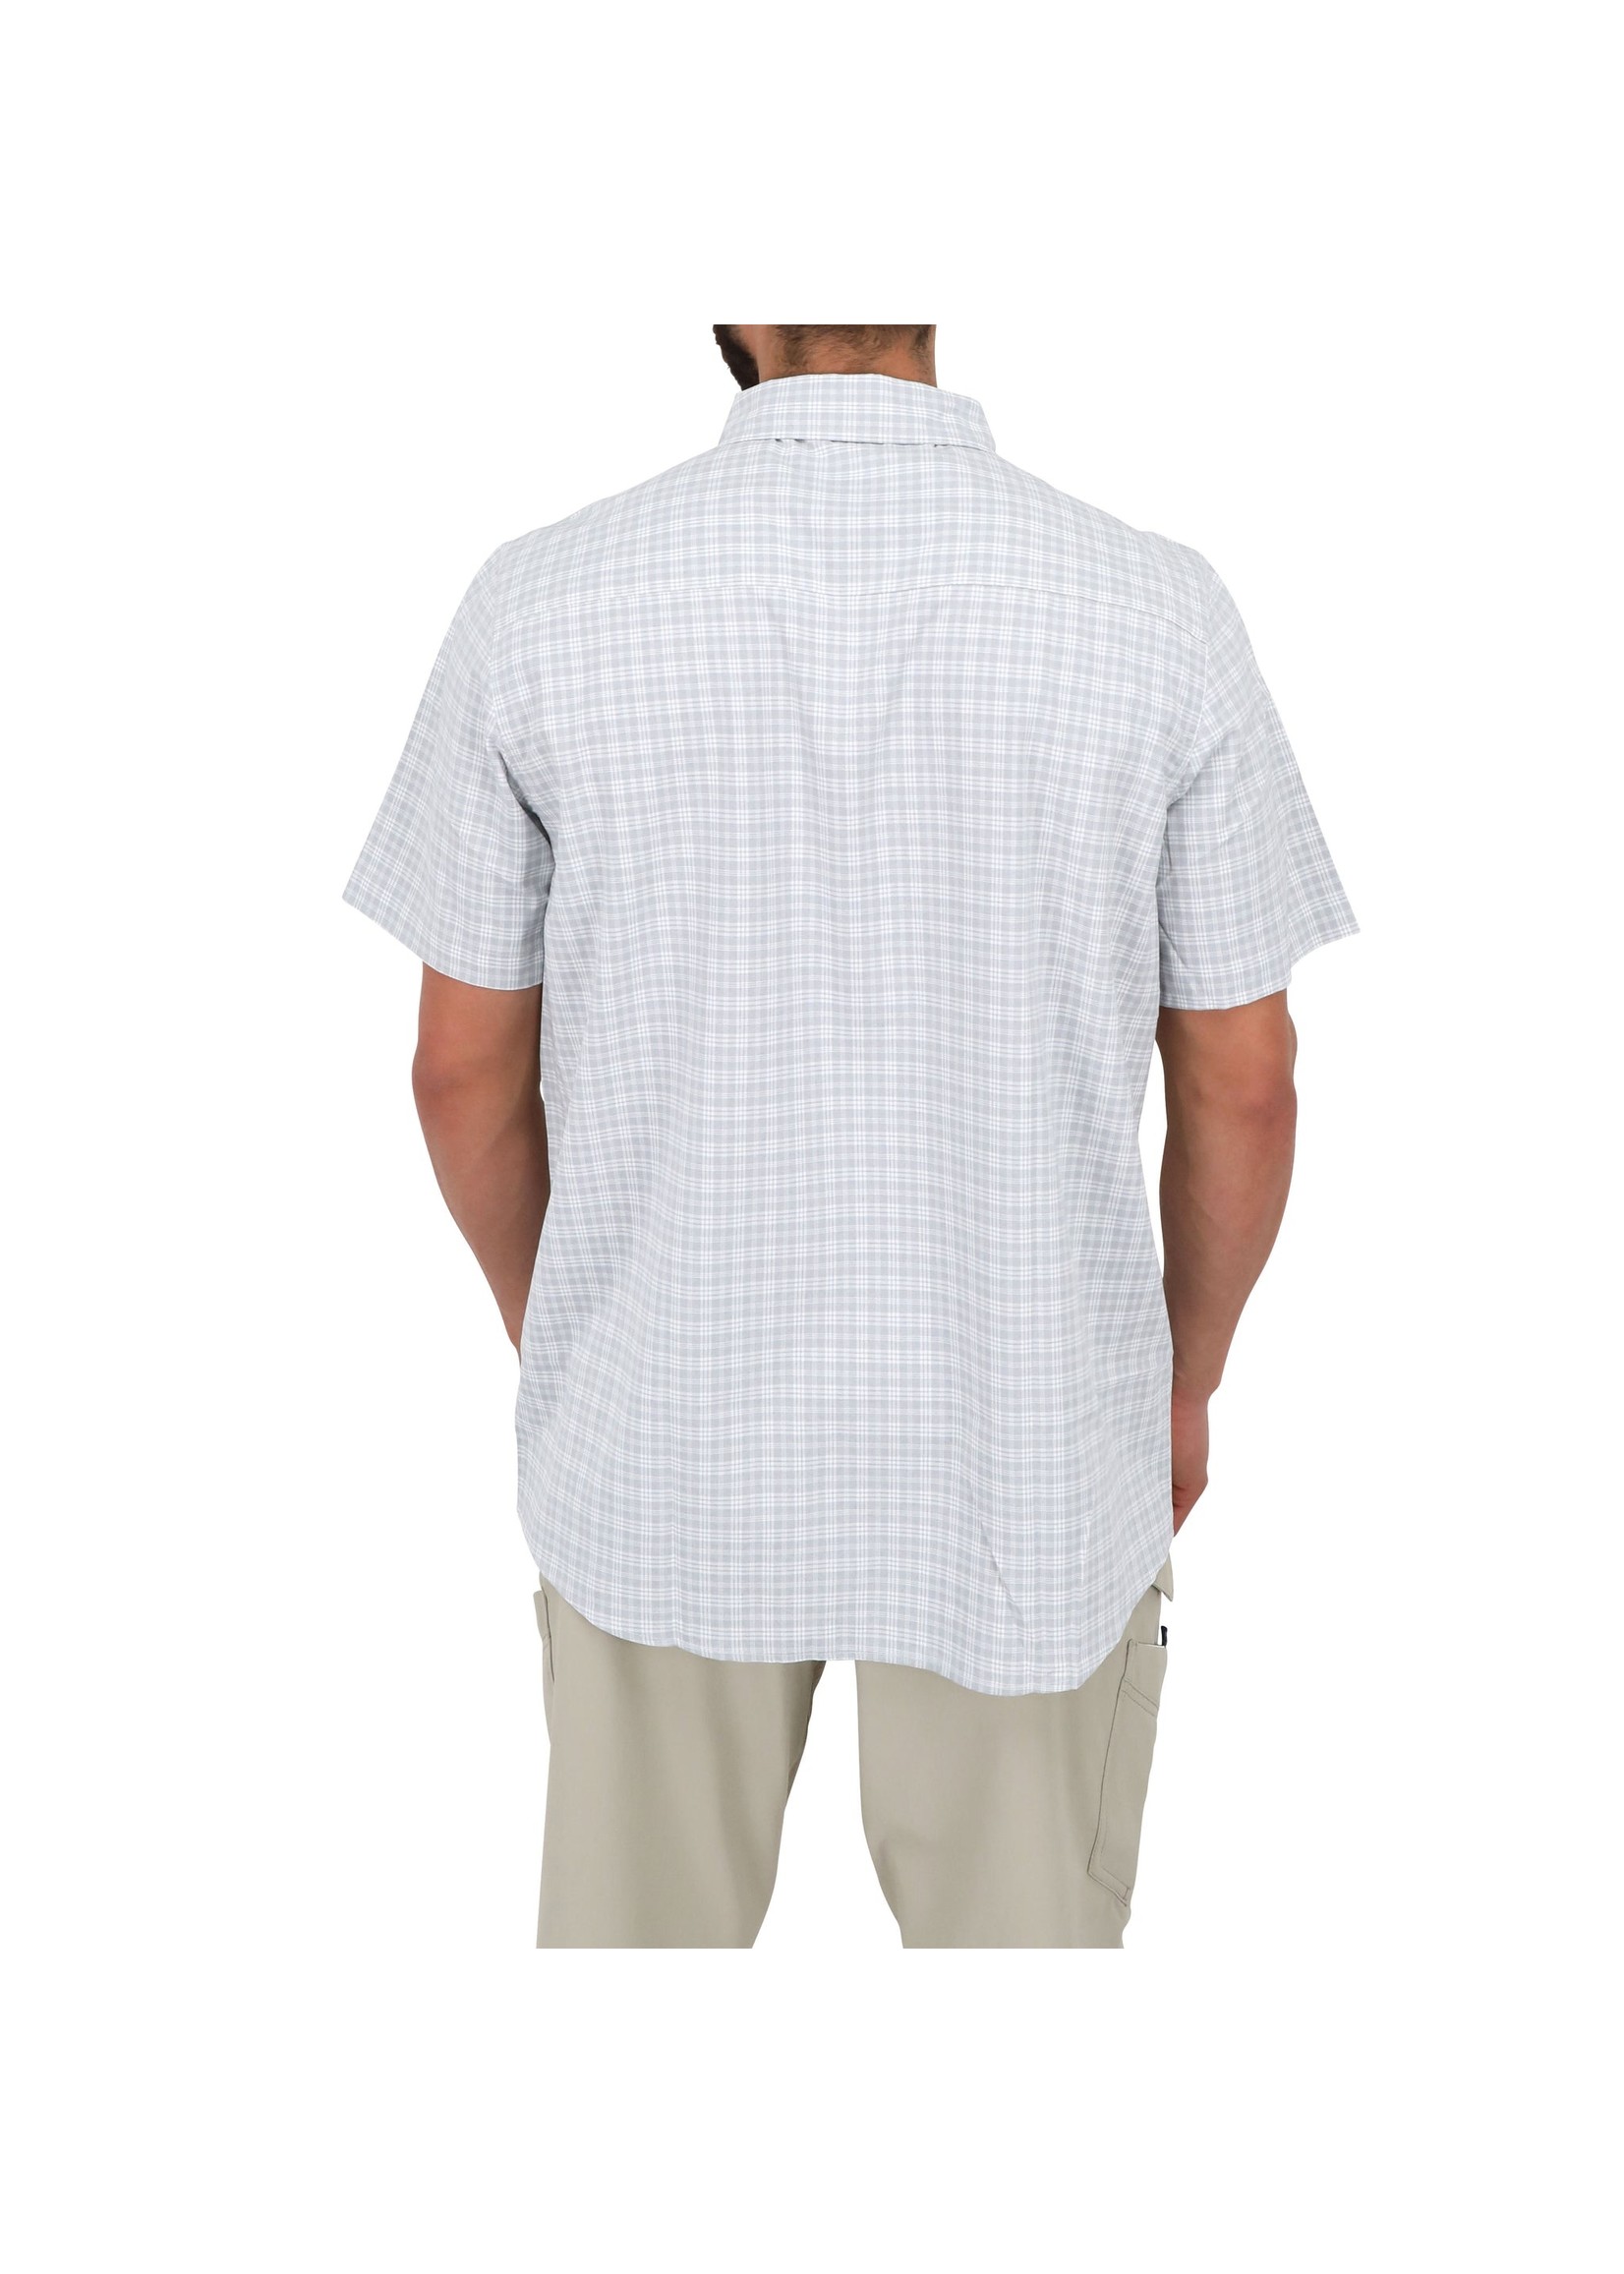 AFTCO Dorsal SS Button Down Shirt